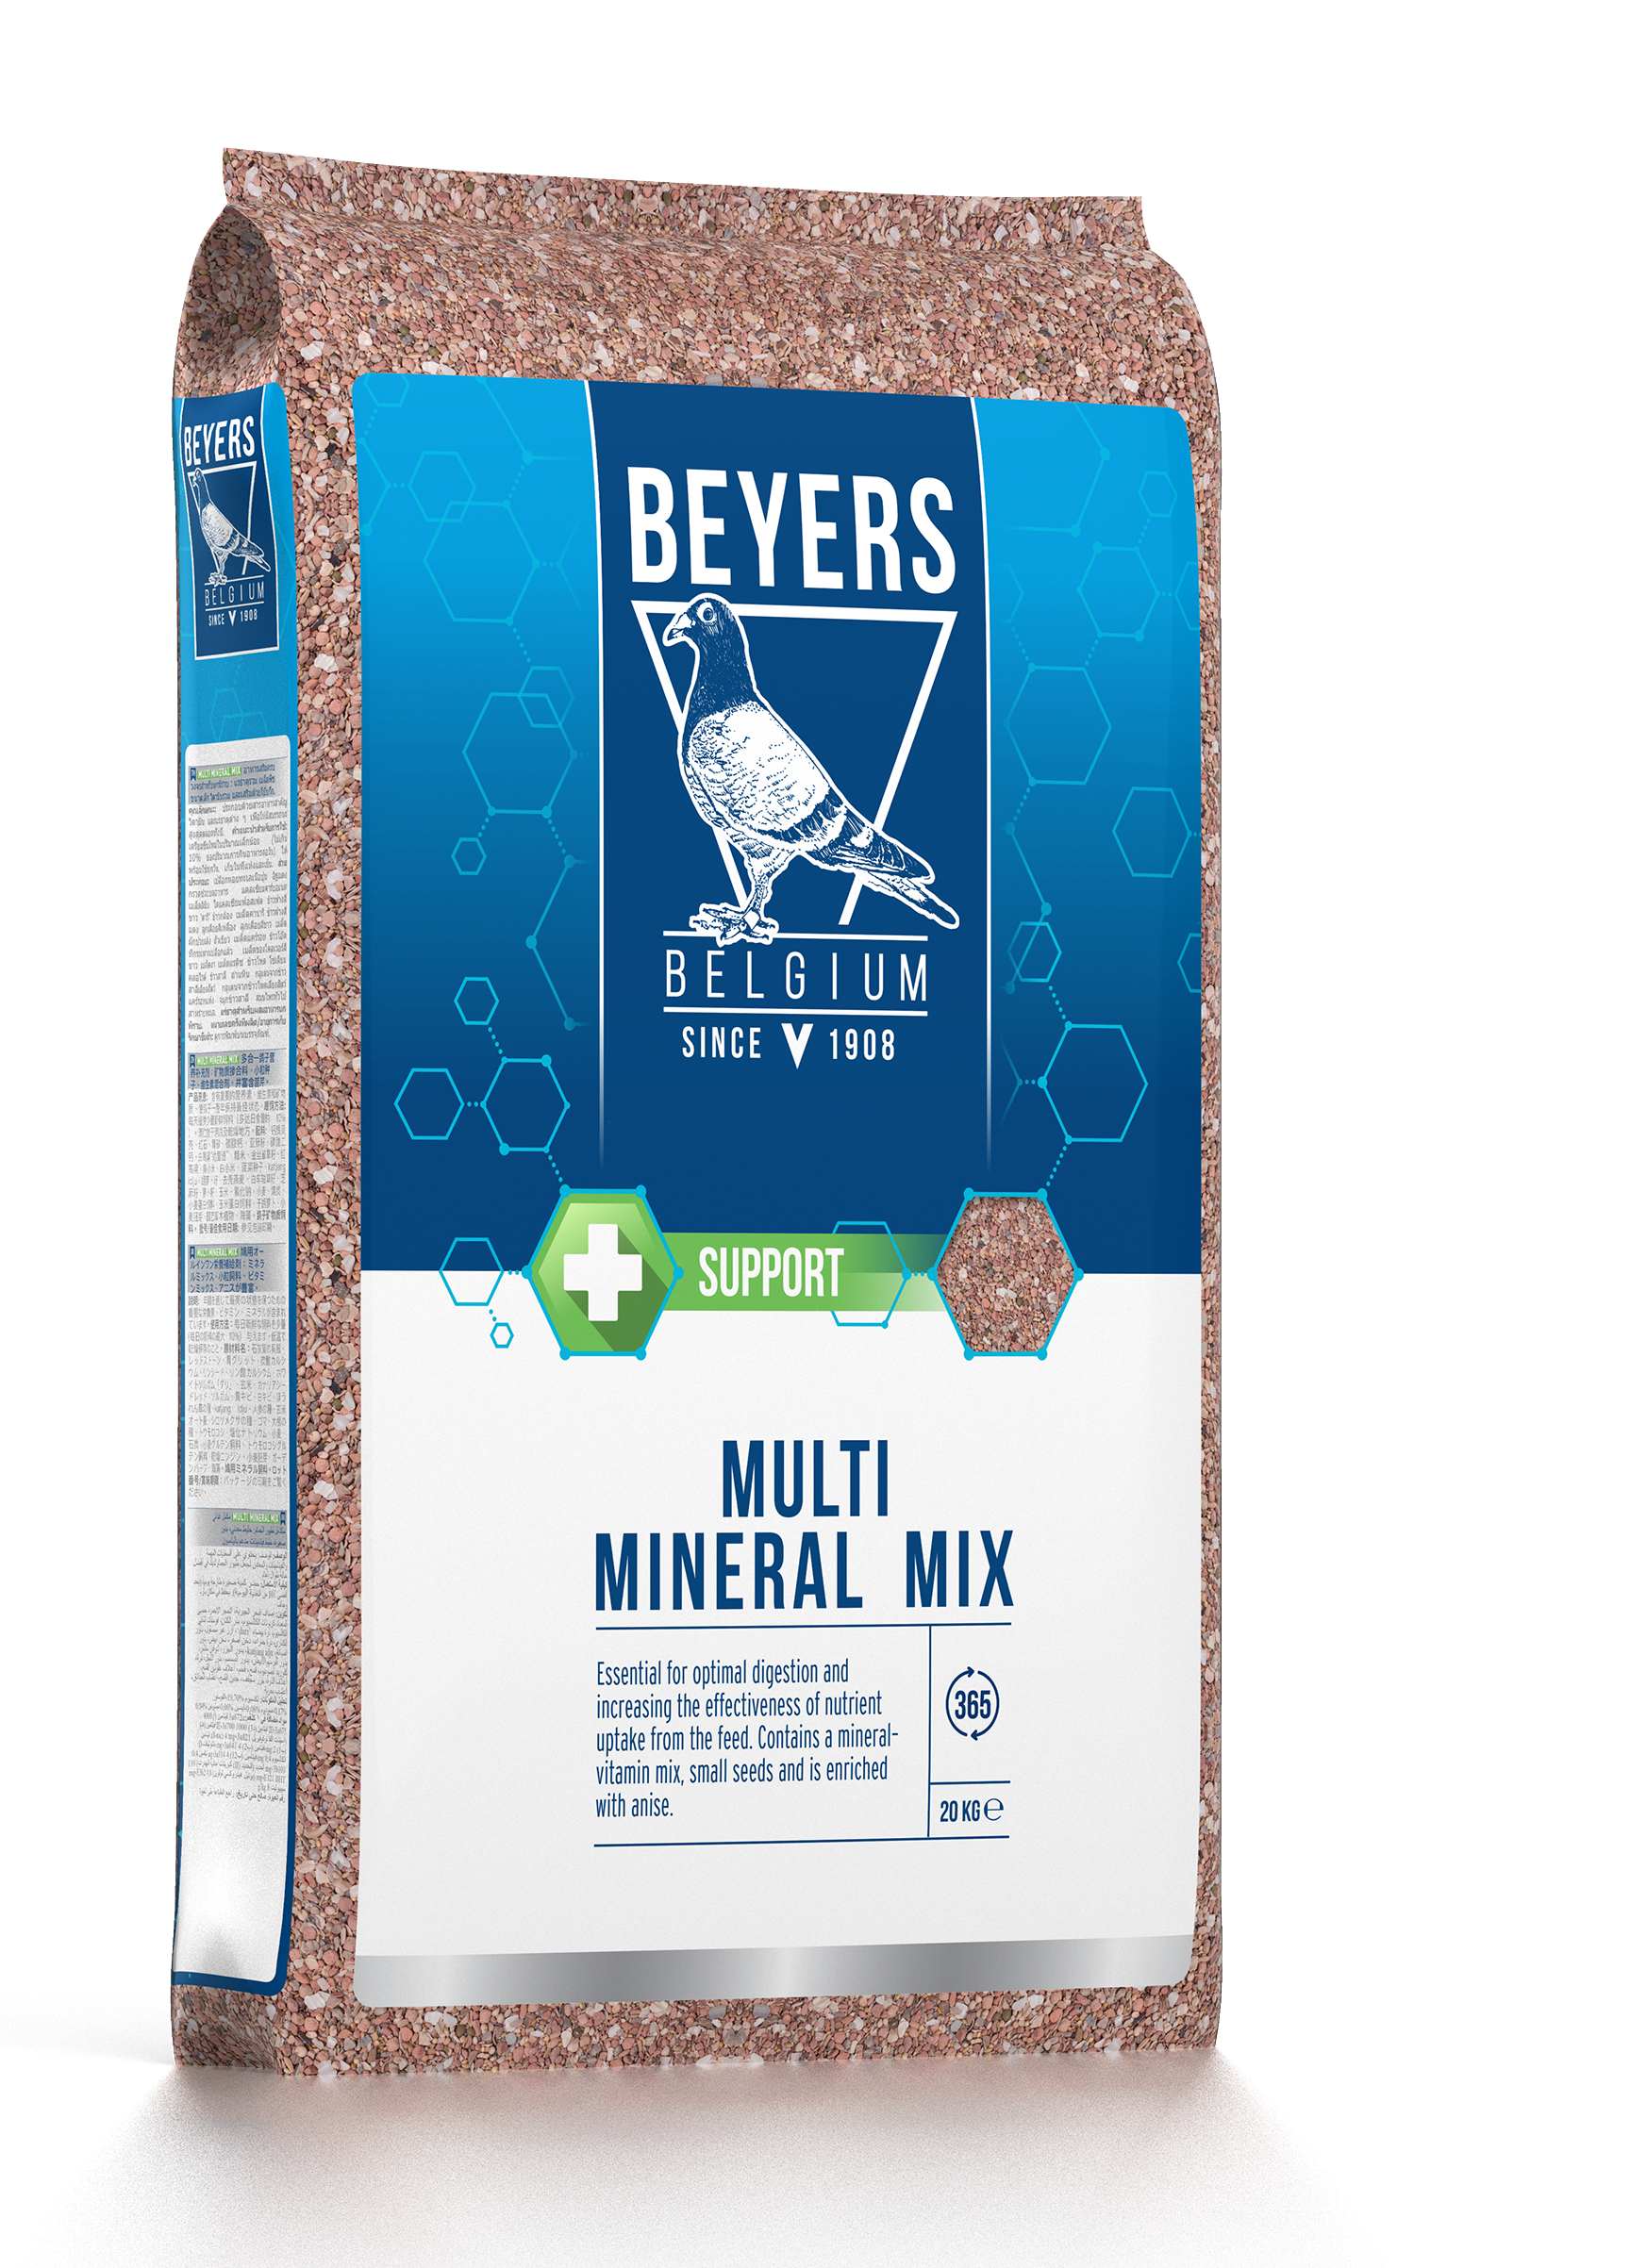 Beyers Multimineral Mix (Sack)